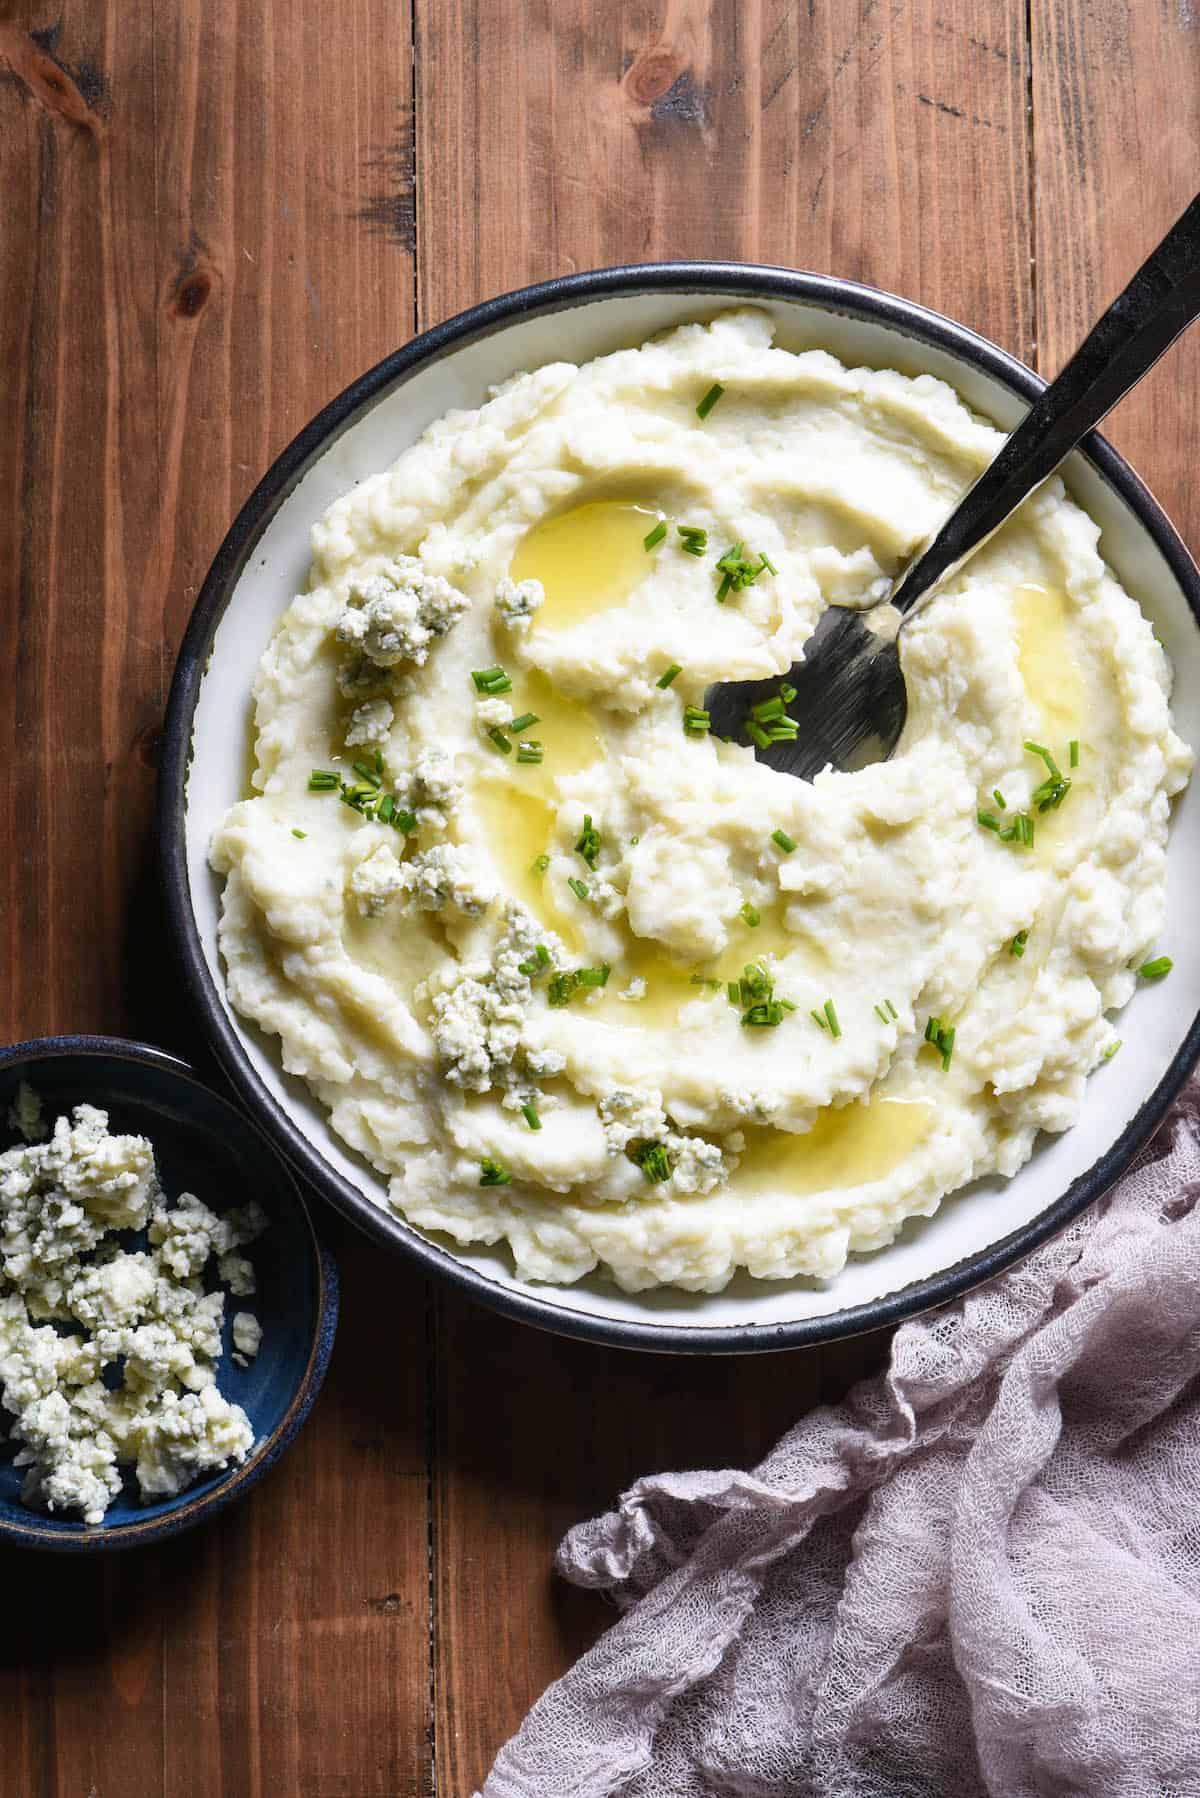 A shallow bowl filled with blue cheese mashed potatoes garnished with melted butter and chives.